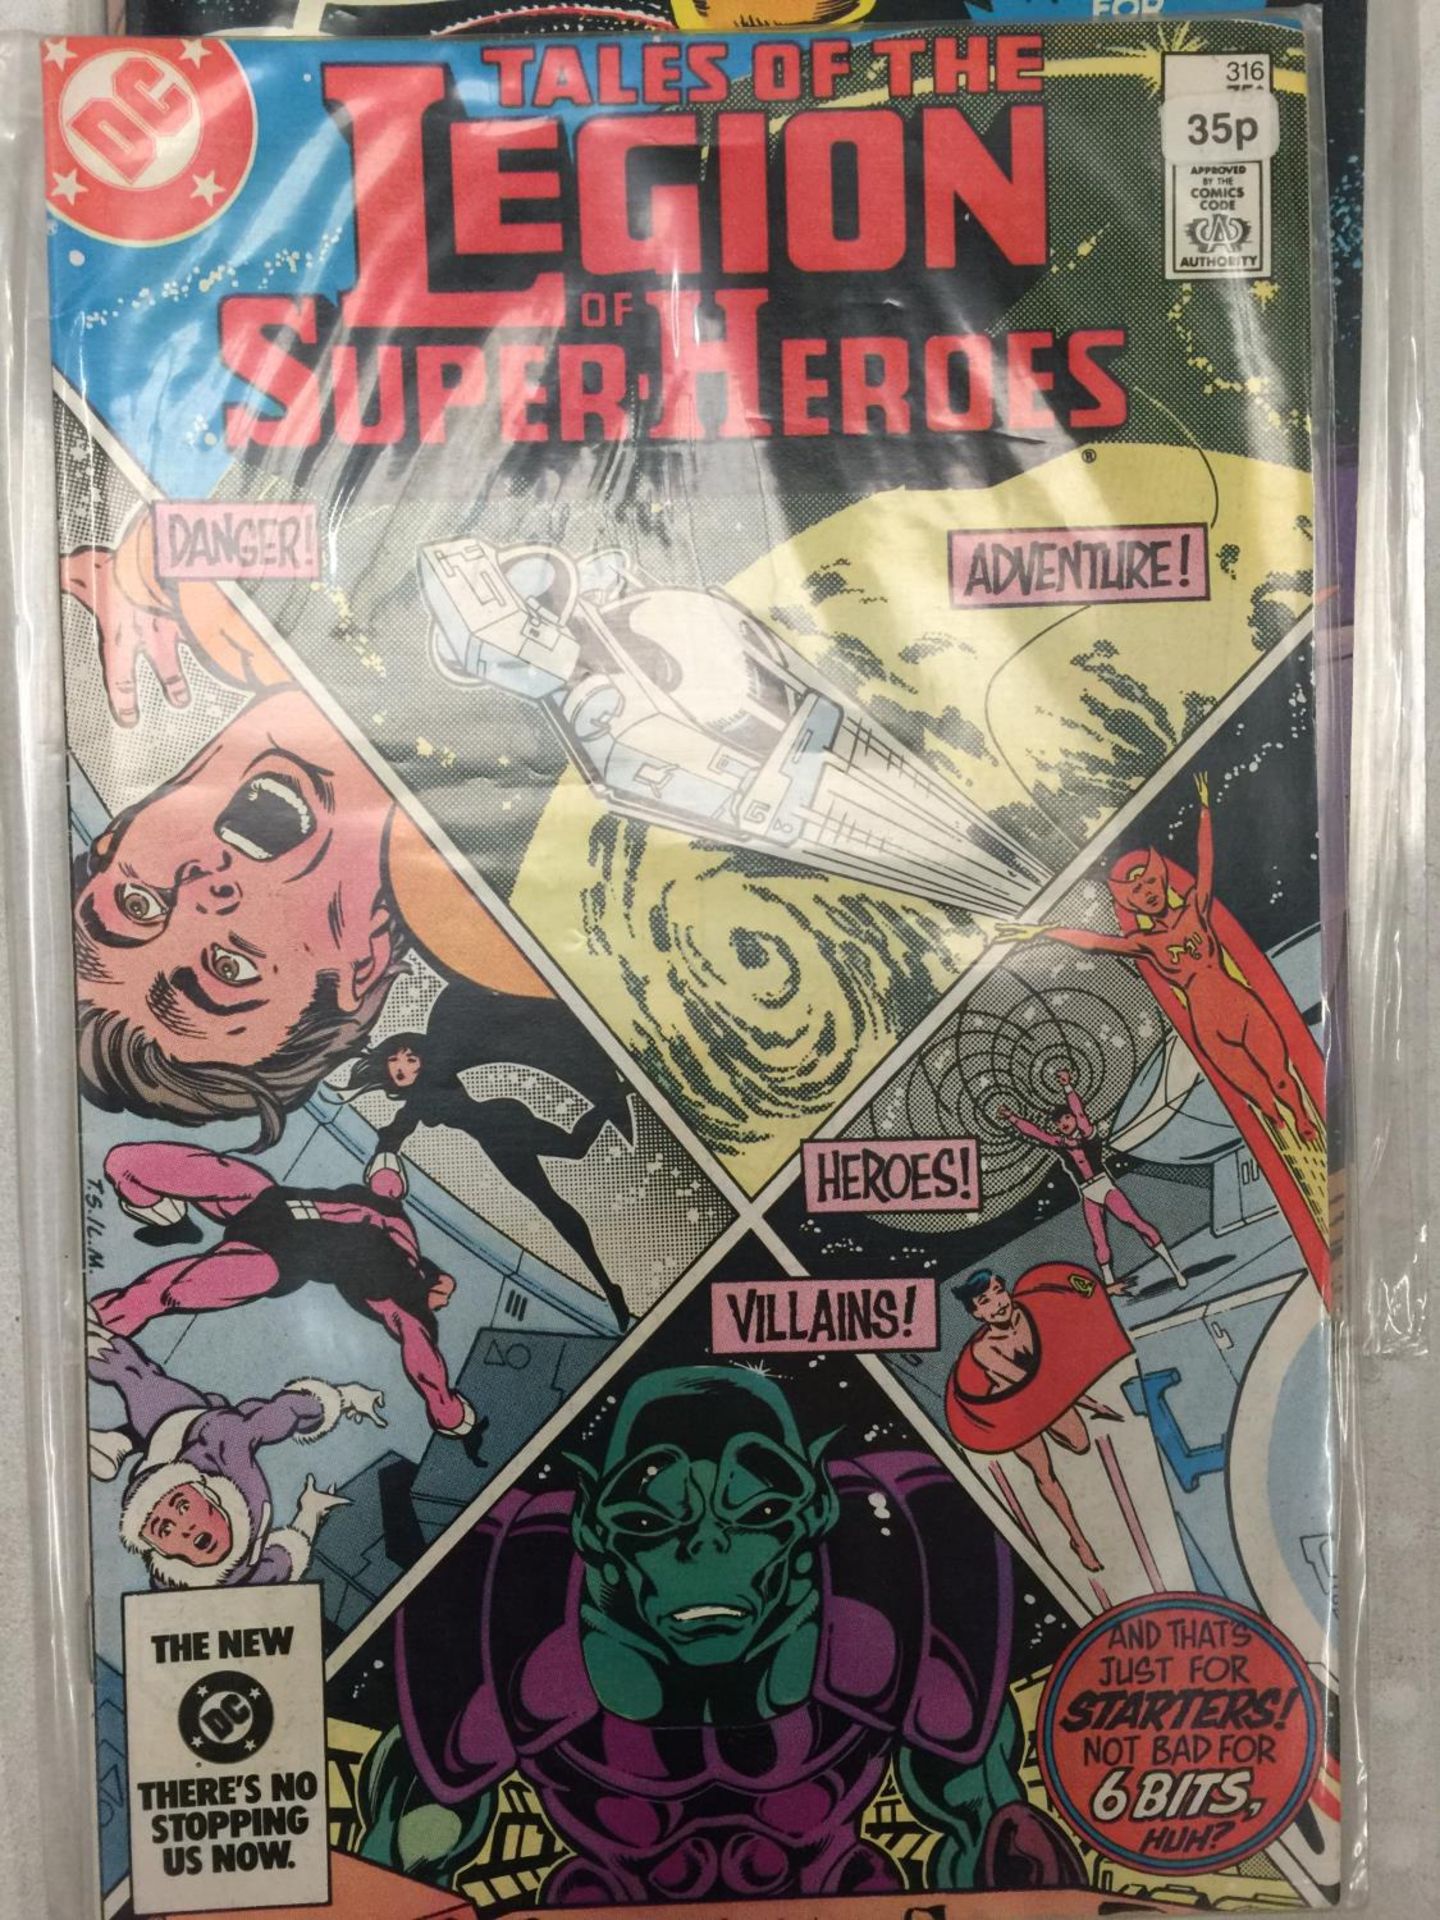 A COLLECTION OF 30 DC COMICS, TO INCLUDE STAR TREK, THE GREEN LANTERN, SUICIDE SQUAD, SHAZAM ETC. - Image 4 of 6